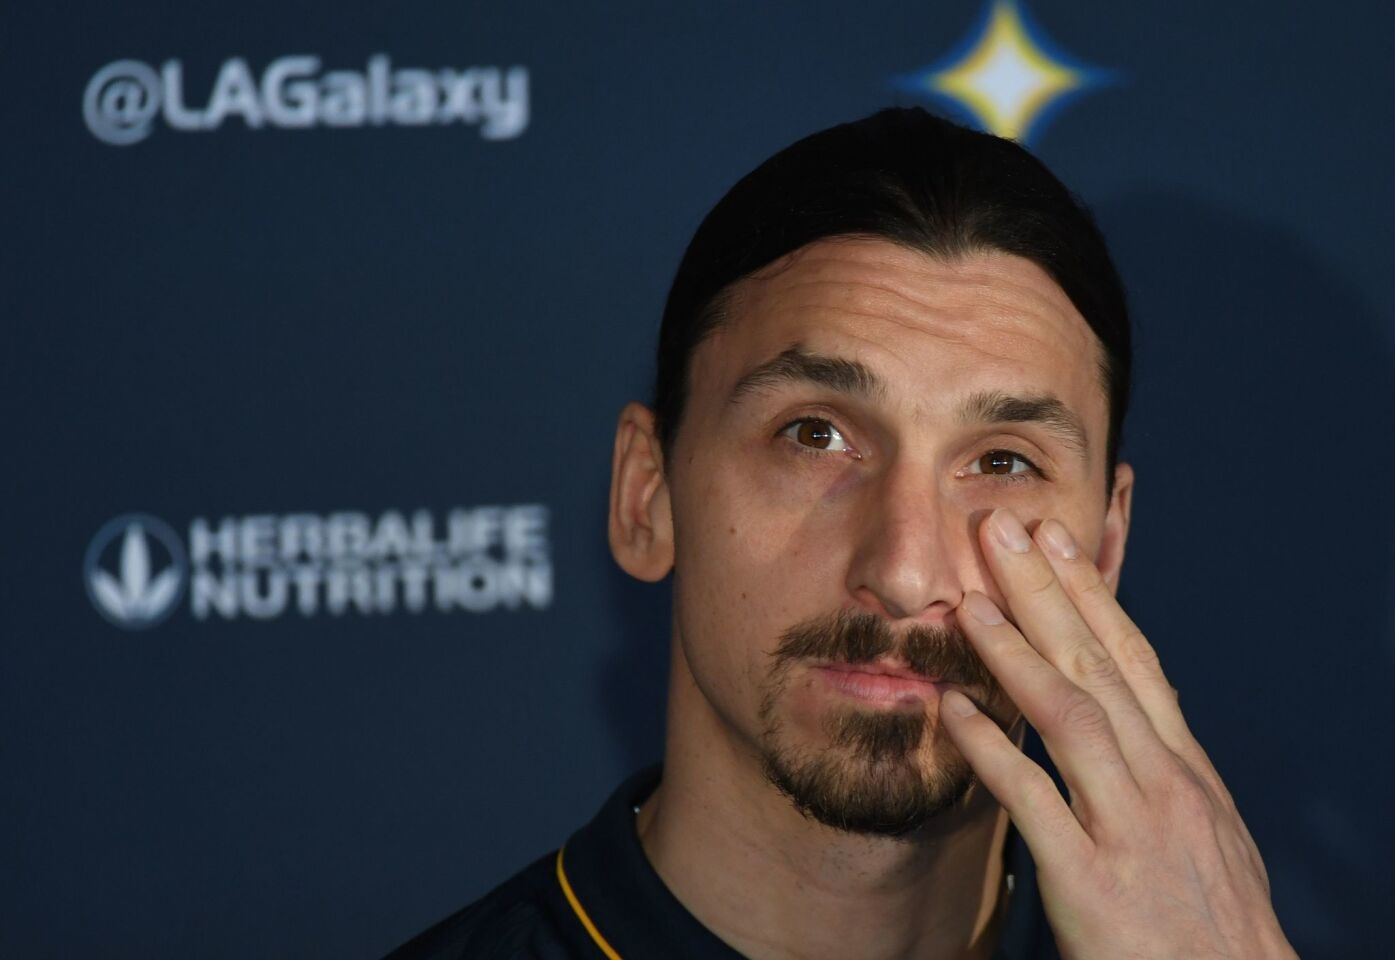 LA Galaxy footballer Zlatan Ibrahimovic gestures during his first press conference for the club in Los Angeles, California, on March 30, 2018. The 36-year-old Swedish striker's move to MLS from Manchester United was confirmed last week, with Ibrahimovic swiftly vowing to reignite the Galaxy's fortunes after they finished bottom of the league last season. / AFP PHOTO / Mark RalstonMARK RALSTON/AFP/Getty Images ** OUTS - ELSENT, FPG, CM - OUTS * NM, PH, VA if sourced by CT, LA or MoD **